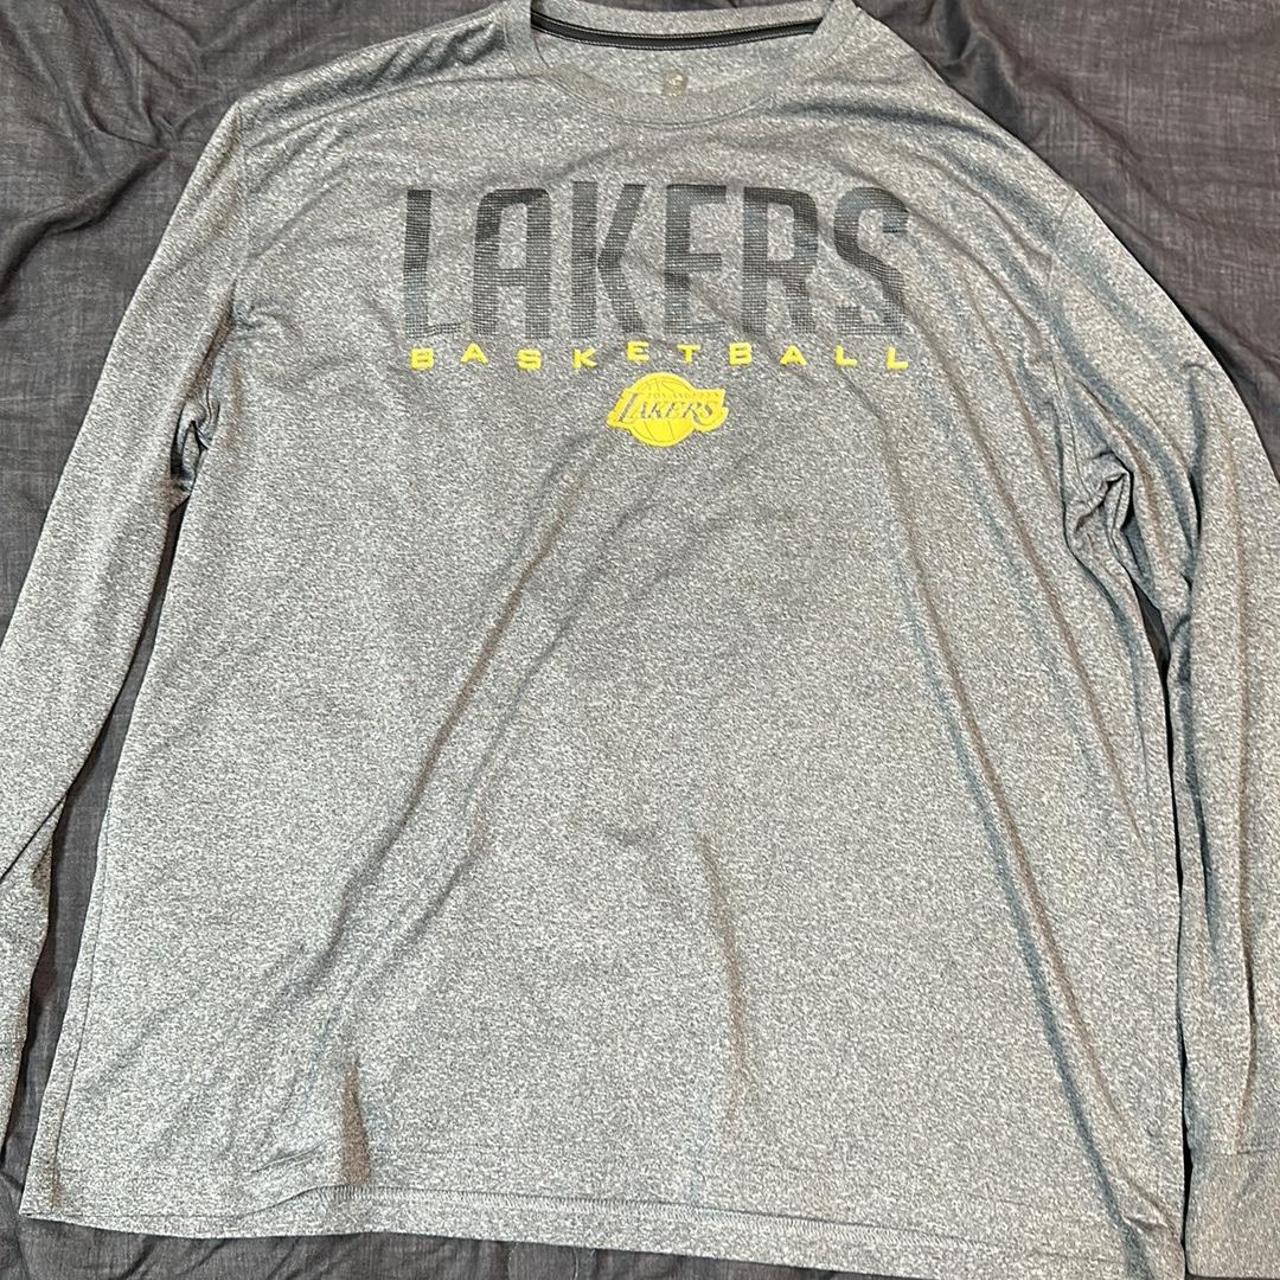 Lakers Long sleeve, dri fit. No cracking in the - Depop